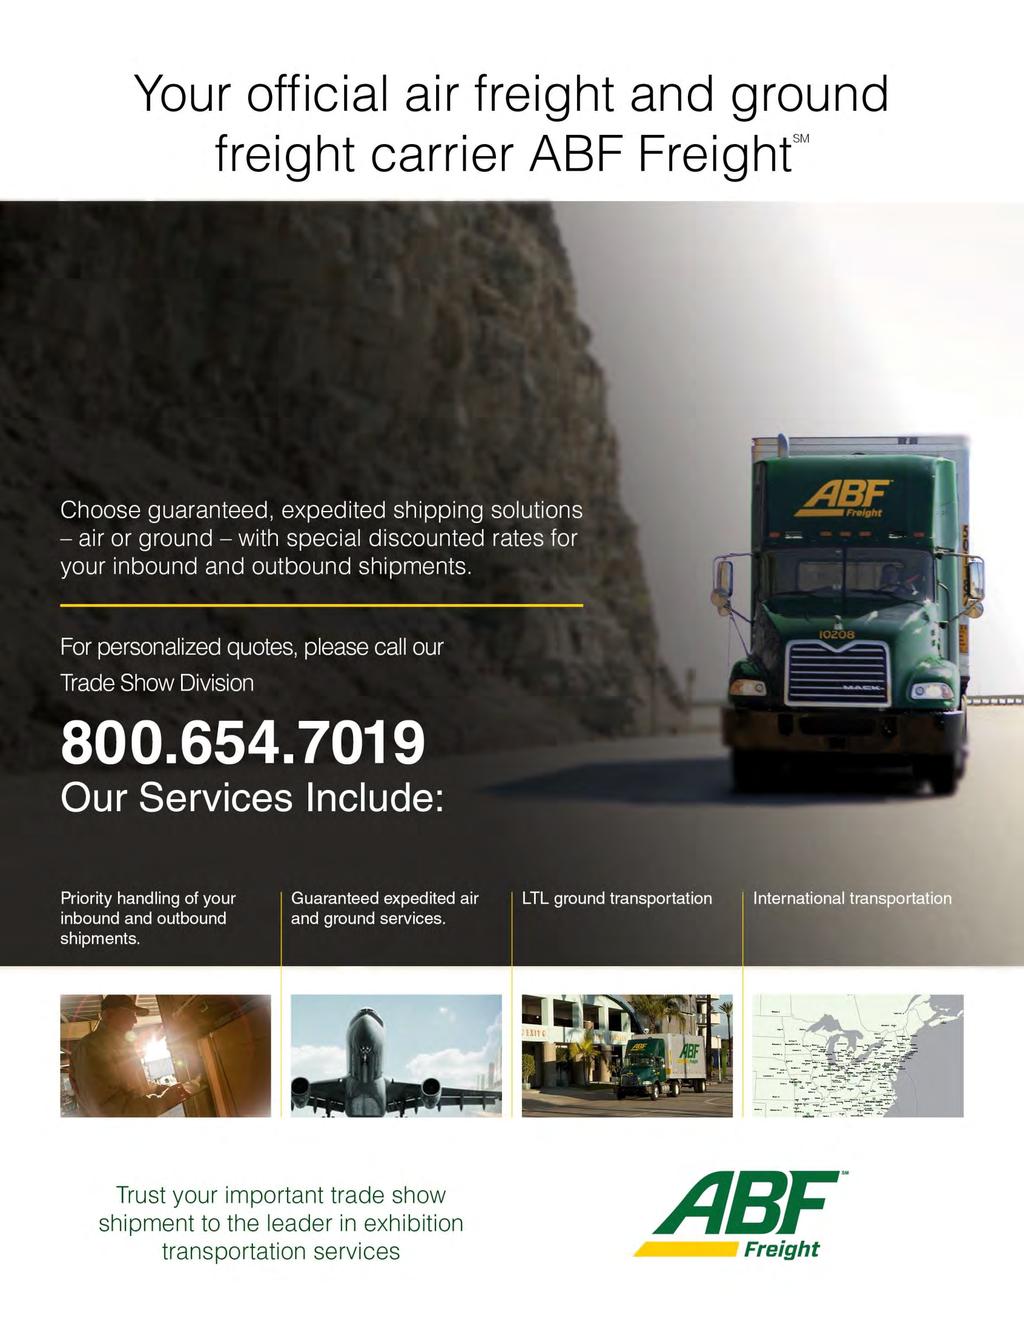 Let ABF Freight make the SBI/ACR Breast